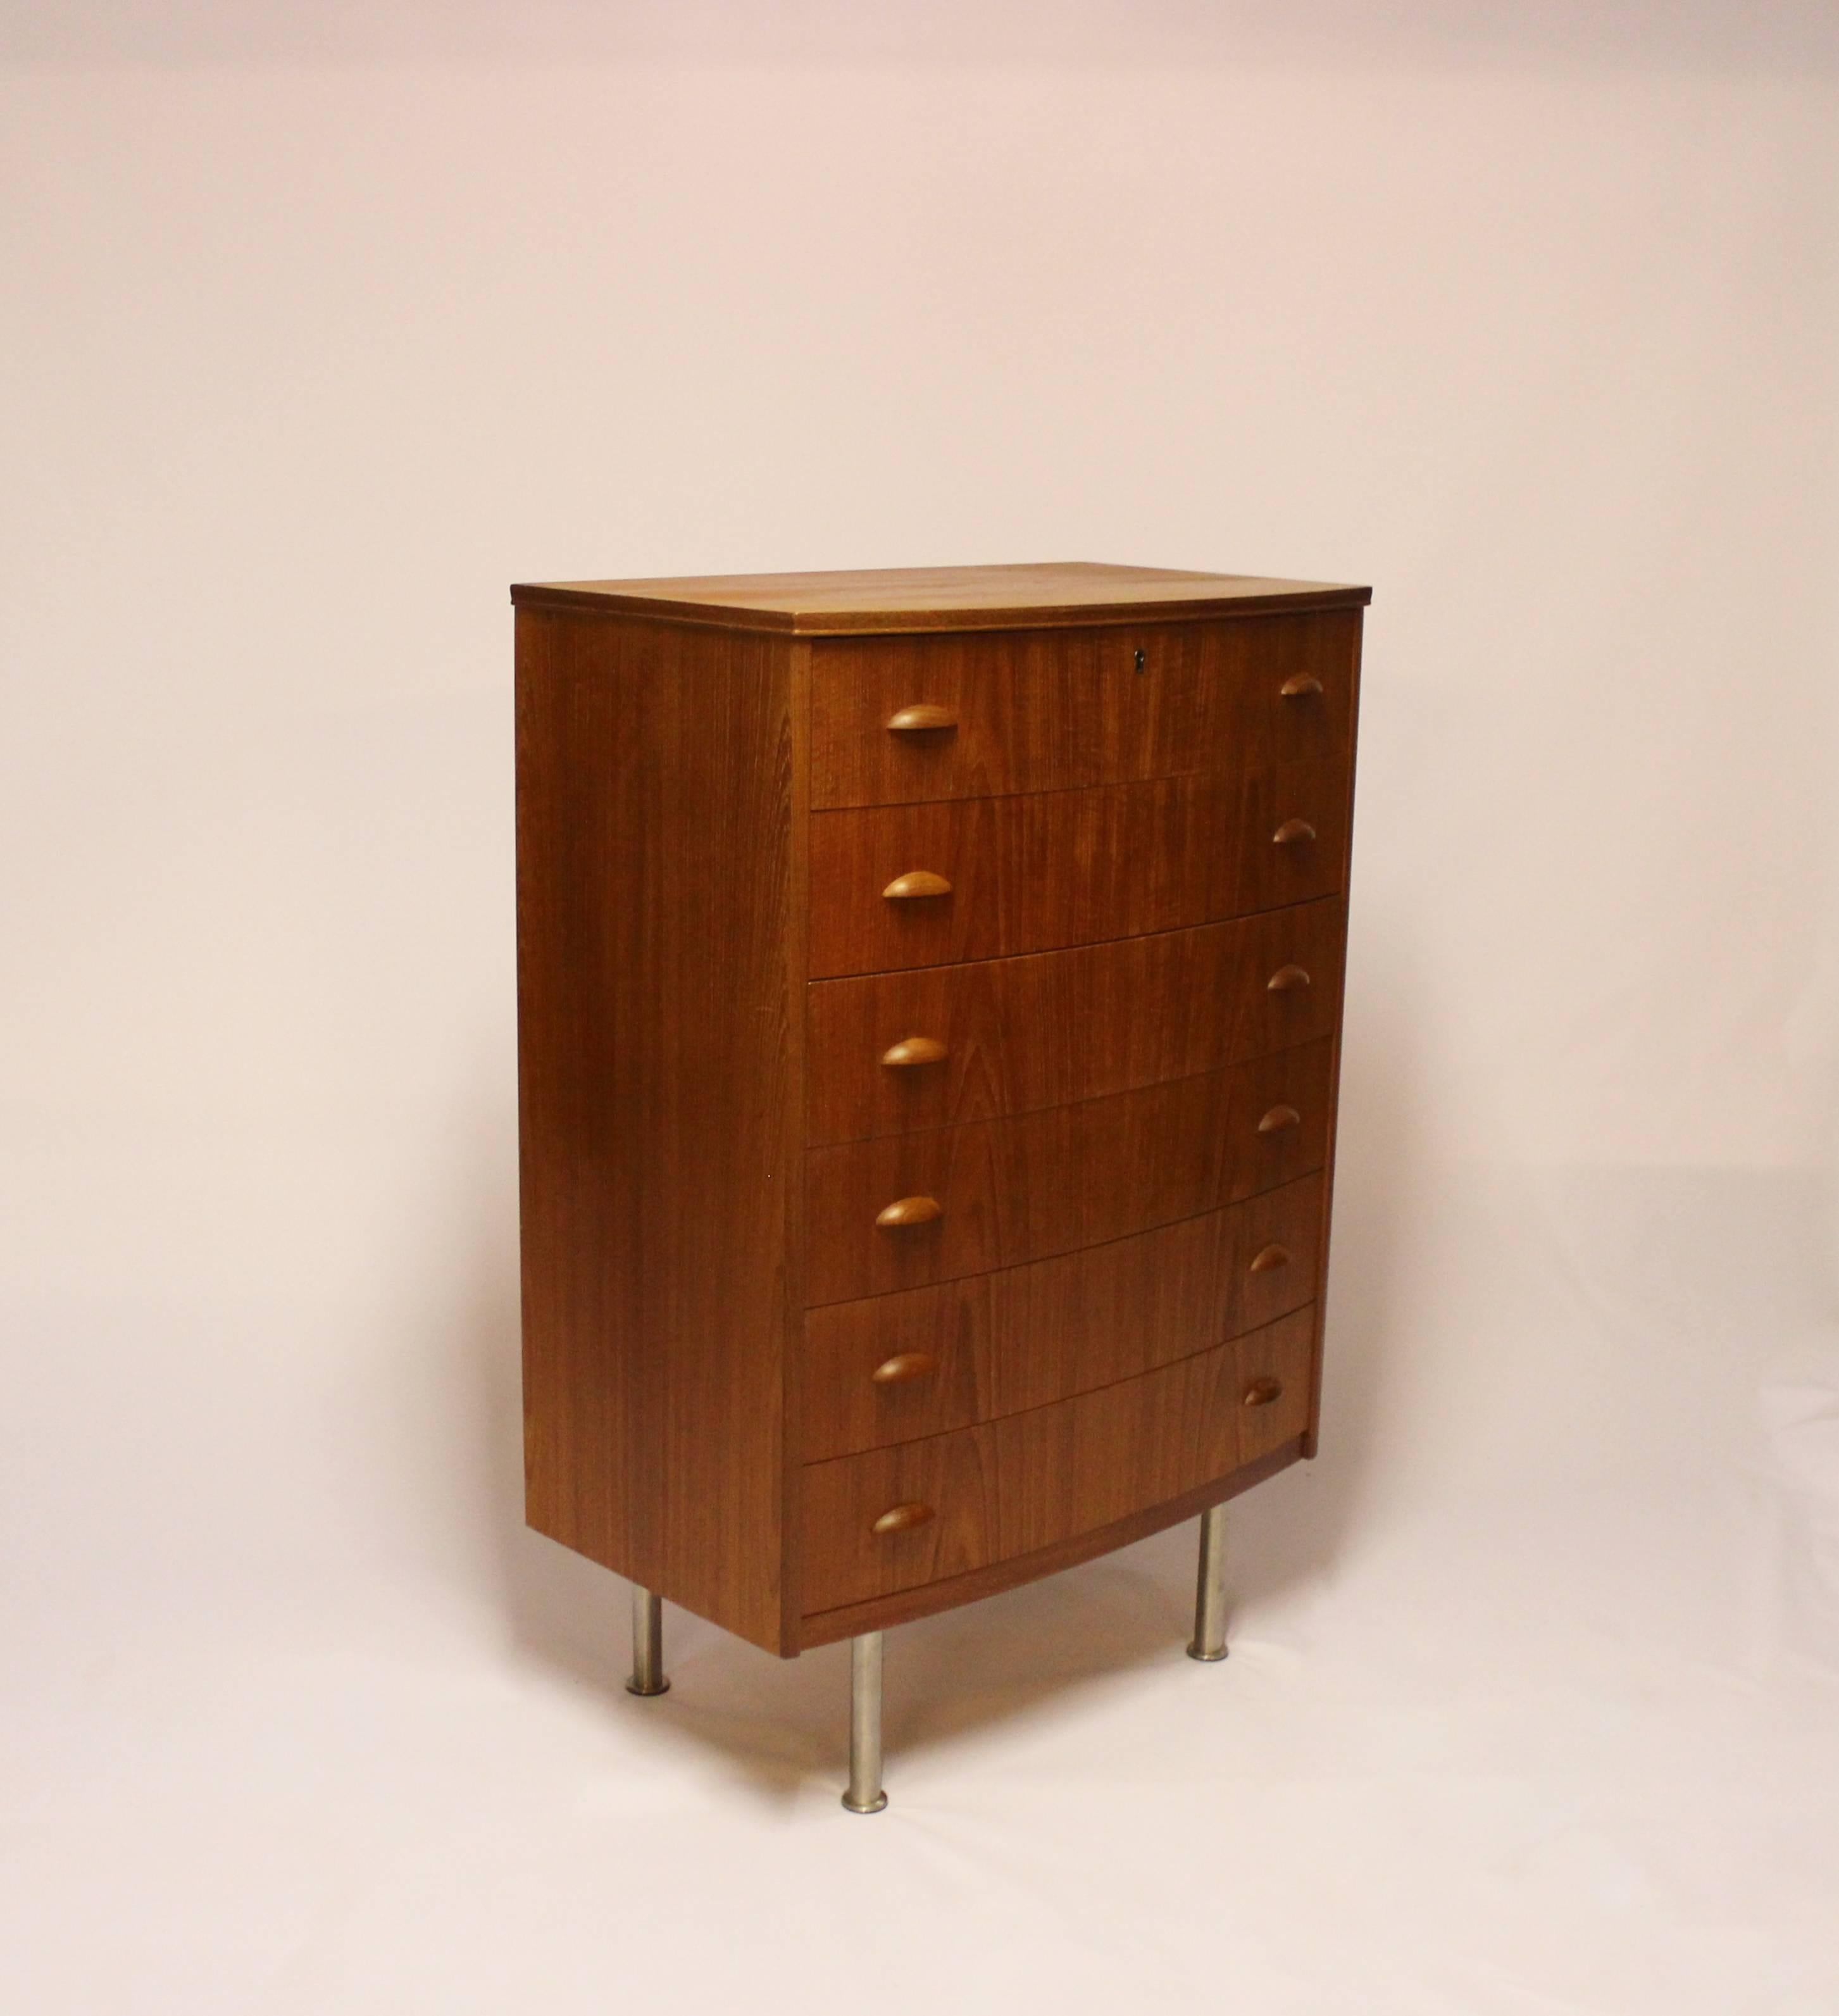 Chest with six drawers in teak and oak designed by Kai Kristiansen and from the 1960s. The chest is in great vintage condition.